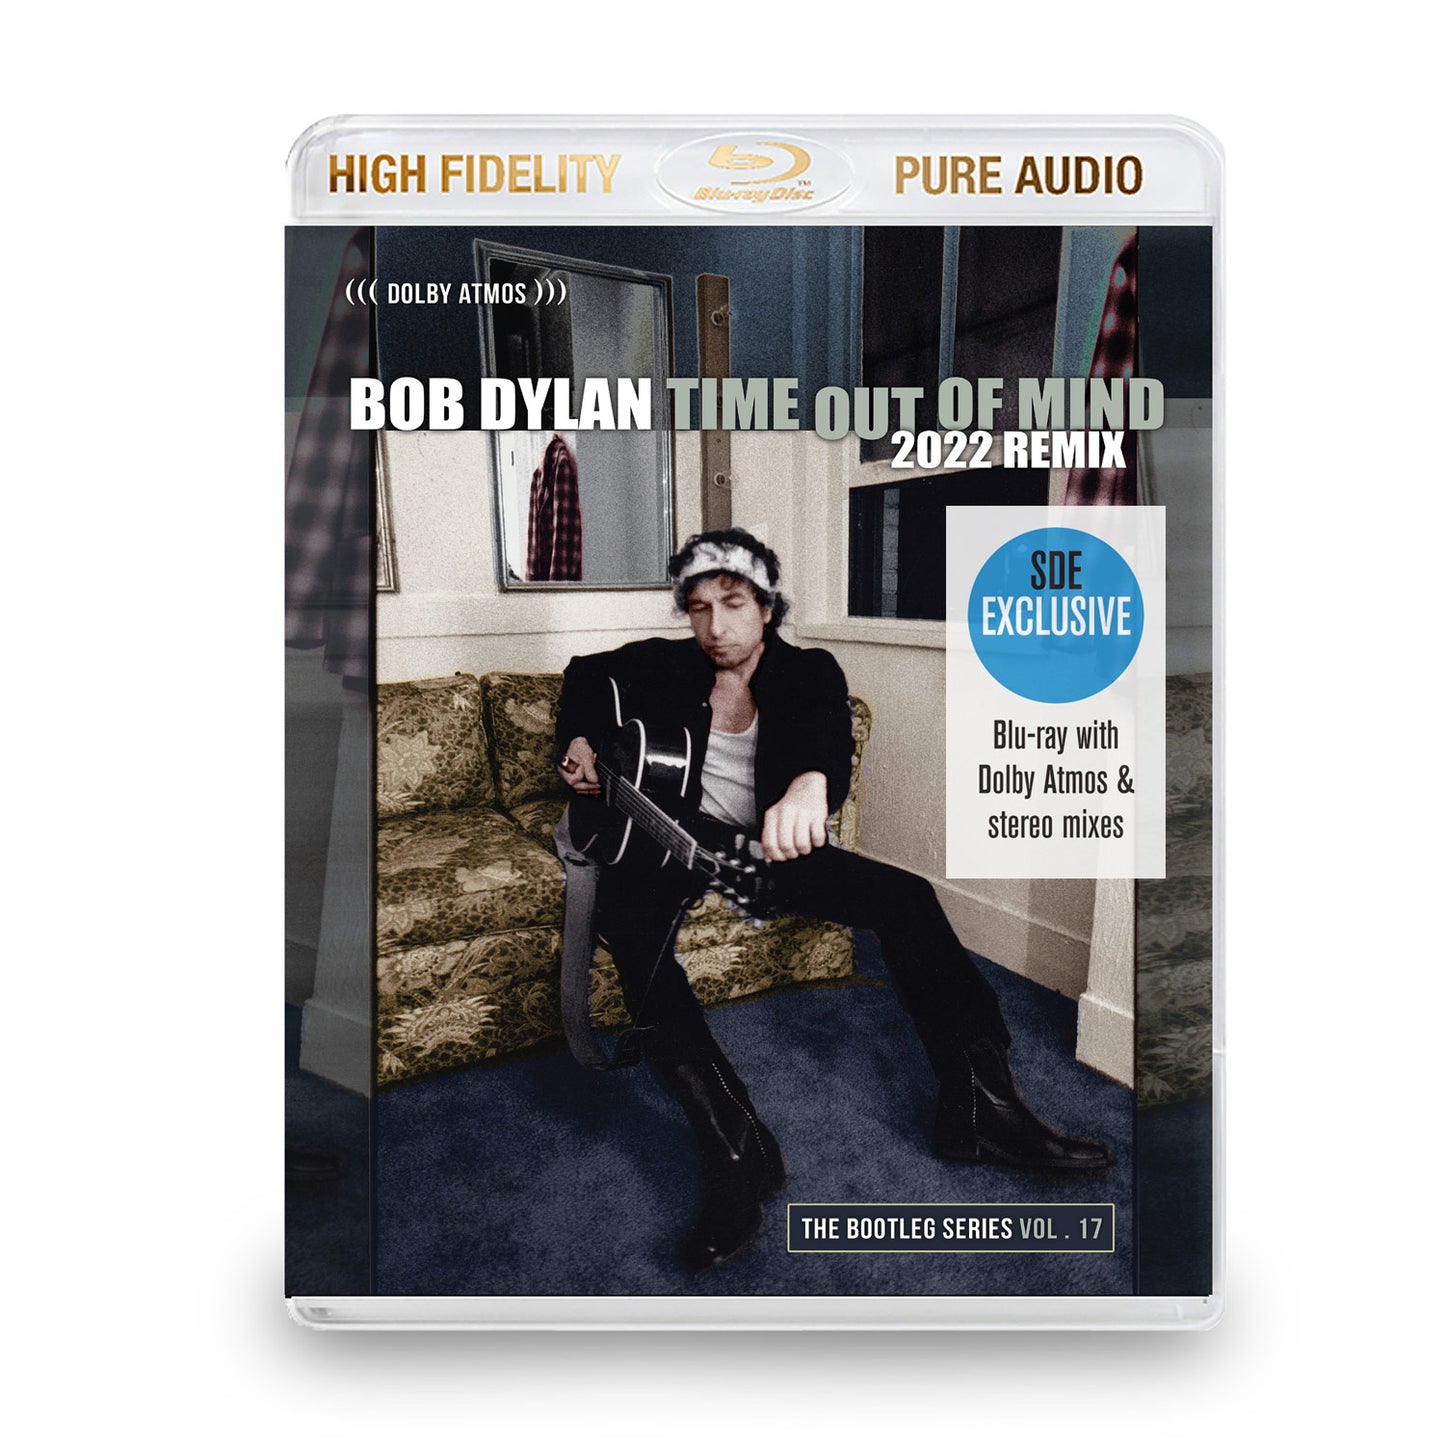 Bob Dylan / Time Out Of Mind exclusive blu-ray audio with Dolby Atmos Mix